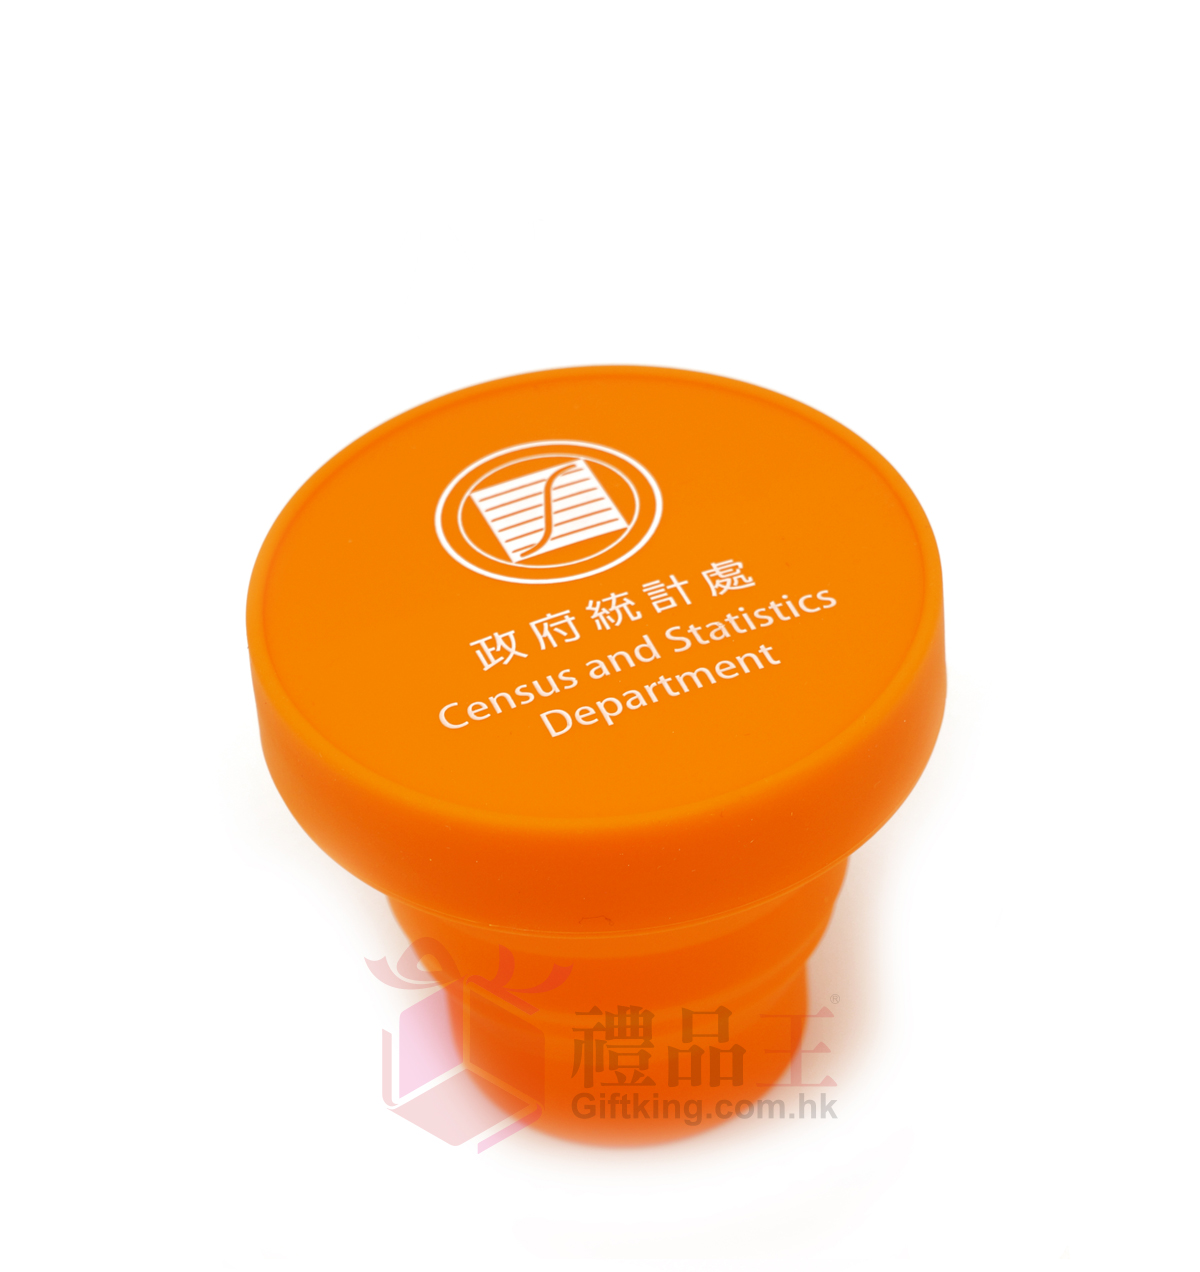 Census and Statistics Department Folding Silicone Cup (Silicone gift)